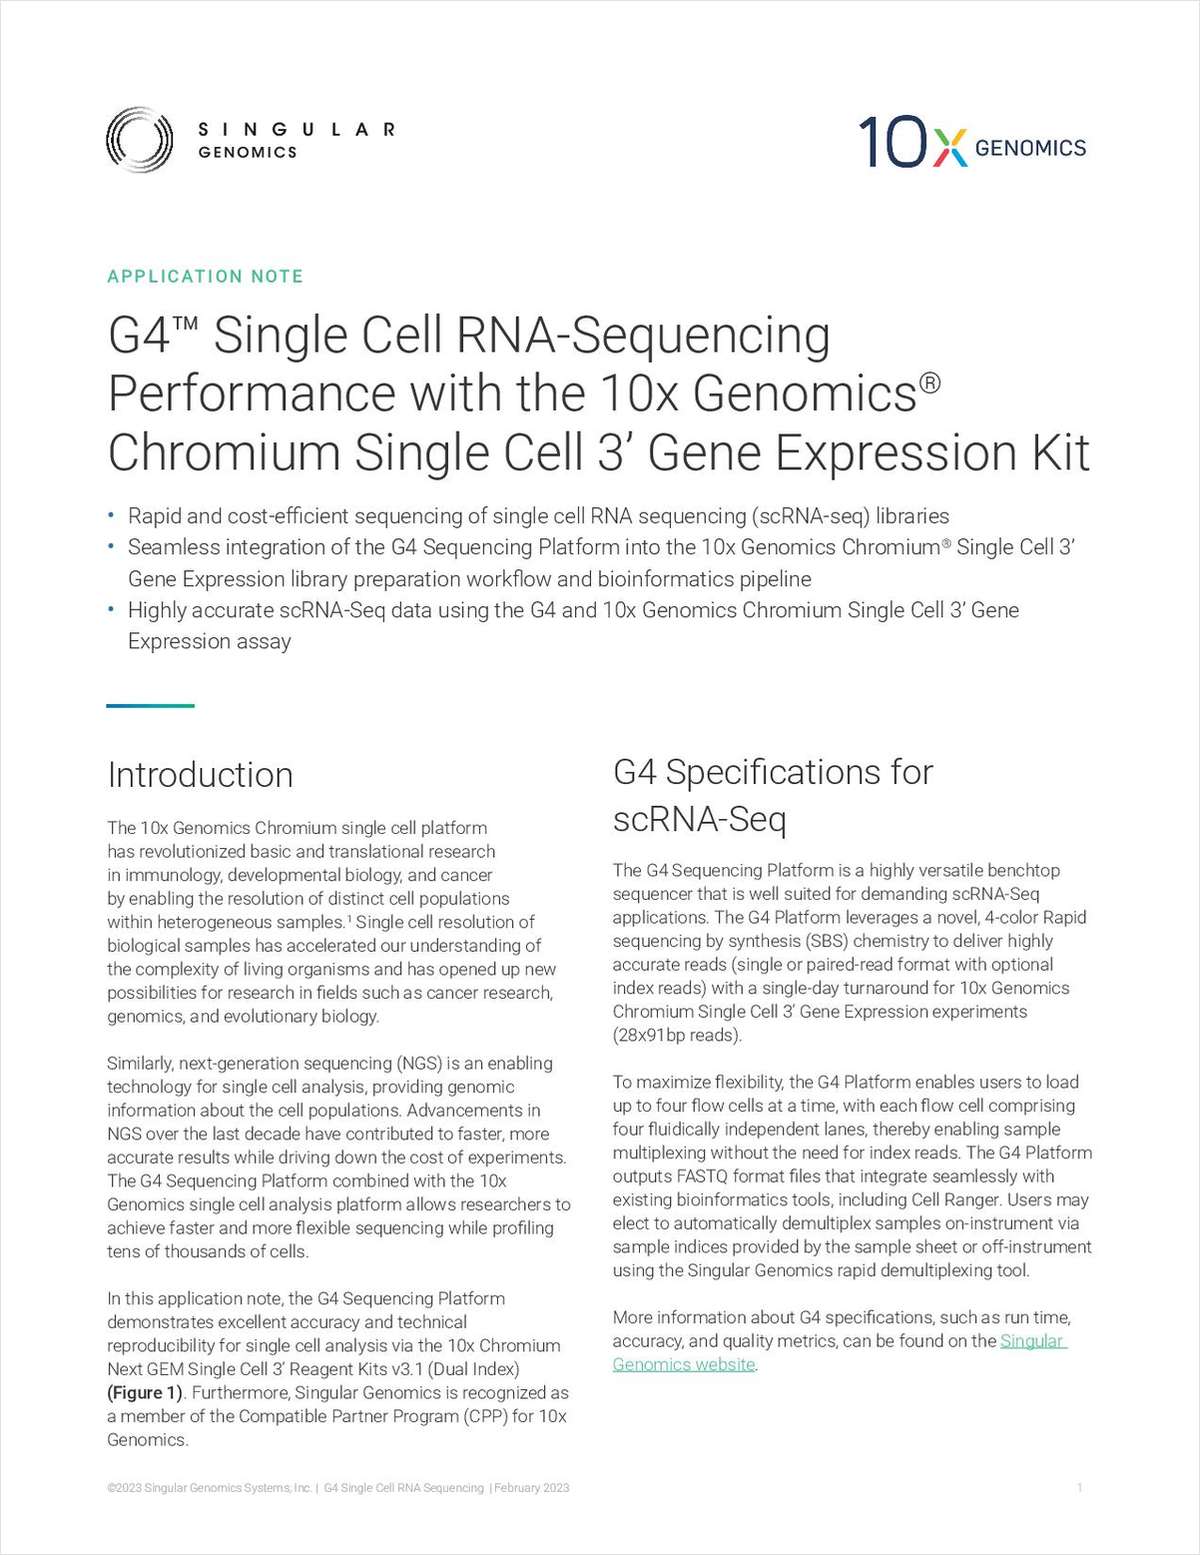 G4 Single-Cell RNA Sequencing Performance with the 10x Genomics Chromium Single Cell 3' Gene Expression Kit